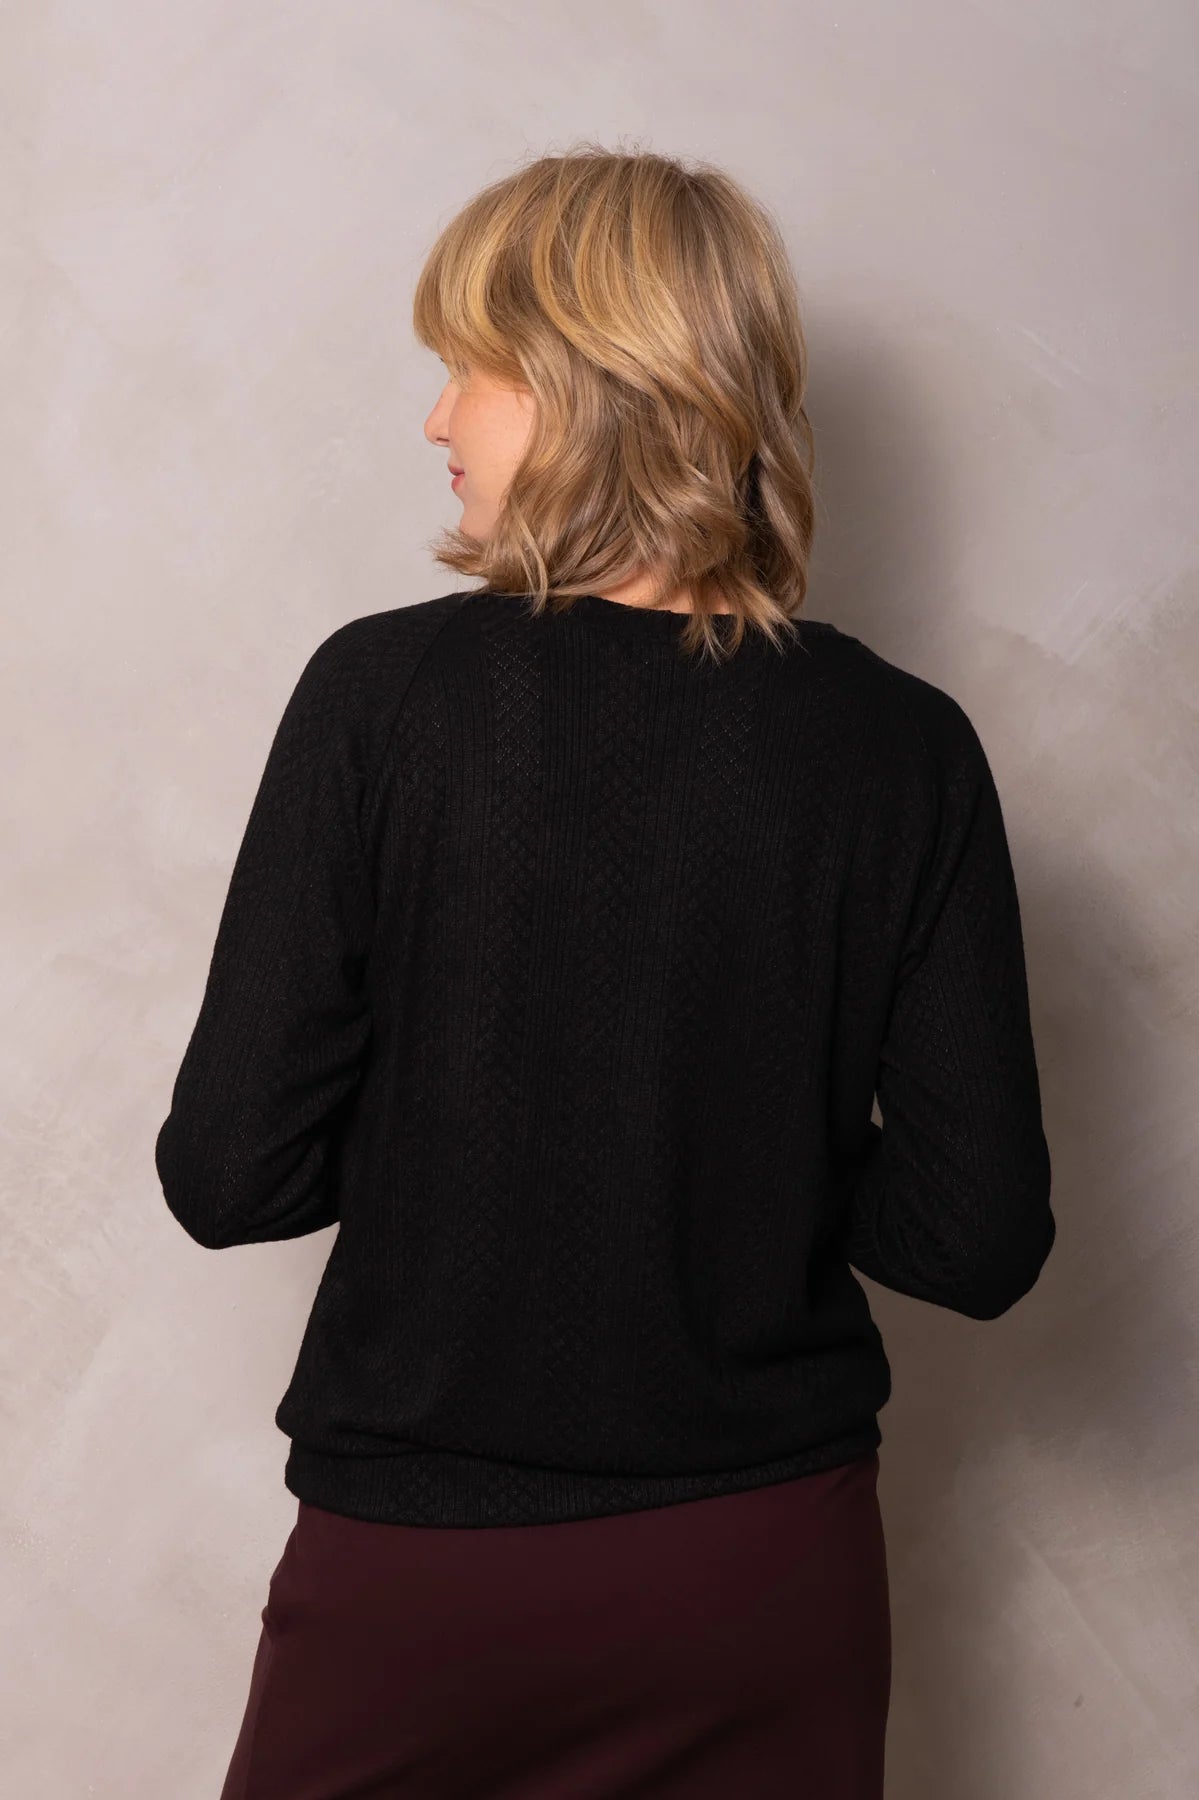 Rhea Sweater by Cokluch, Black, back view, textured knit, raglan sleeves, round neck, band at hem, bamboo rayon blend, sizes XS to 3XL, made in Quebec